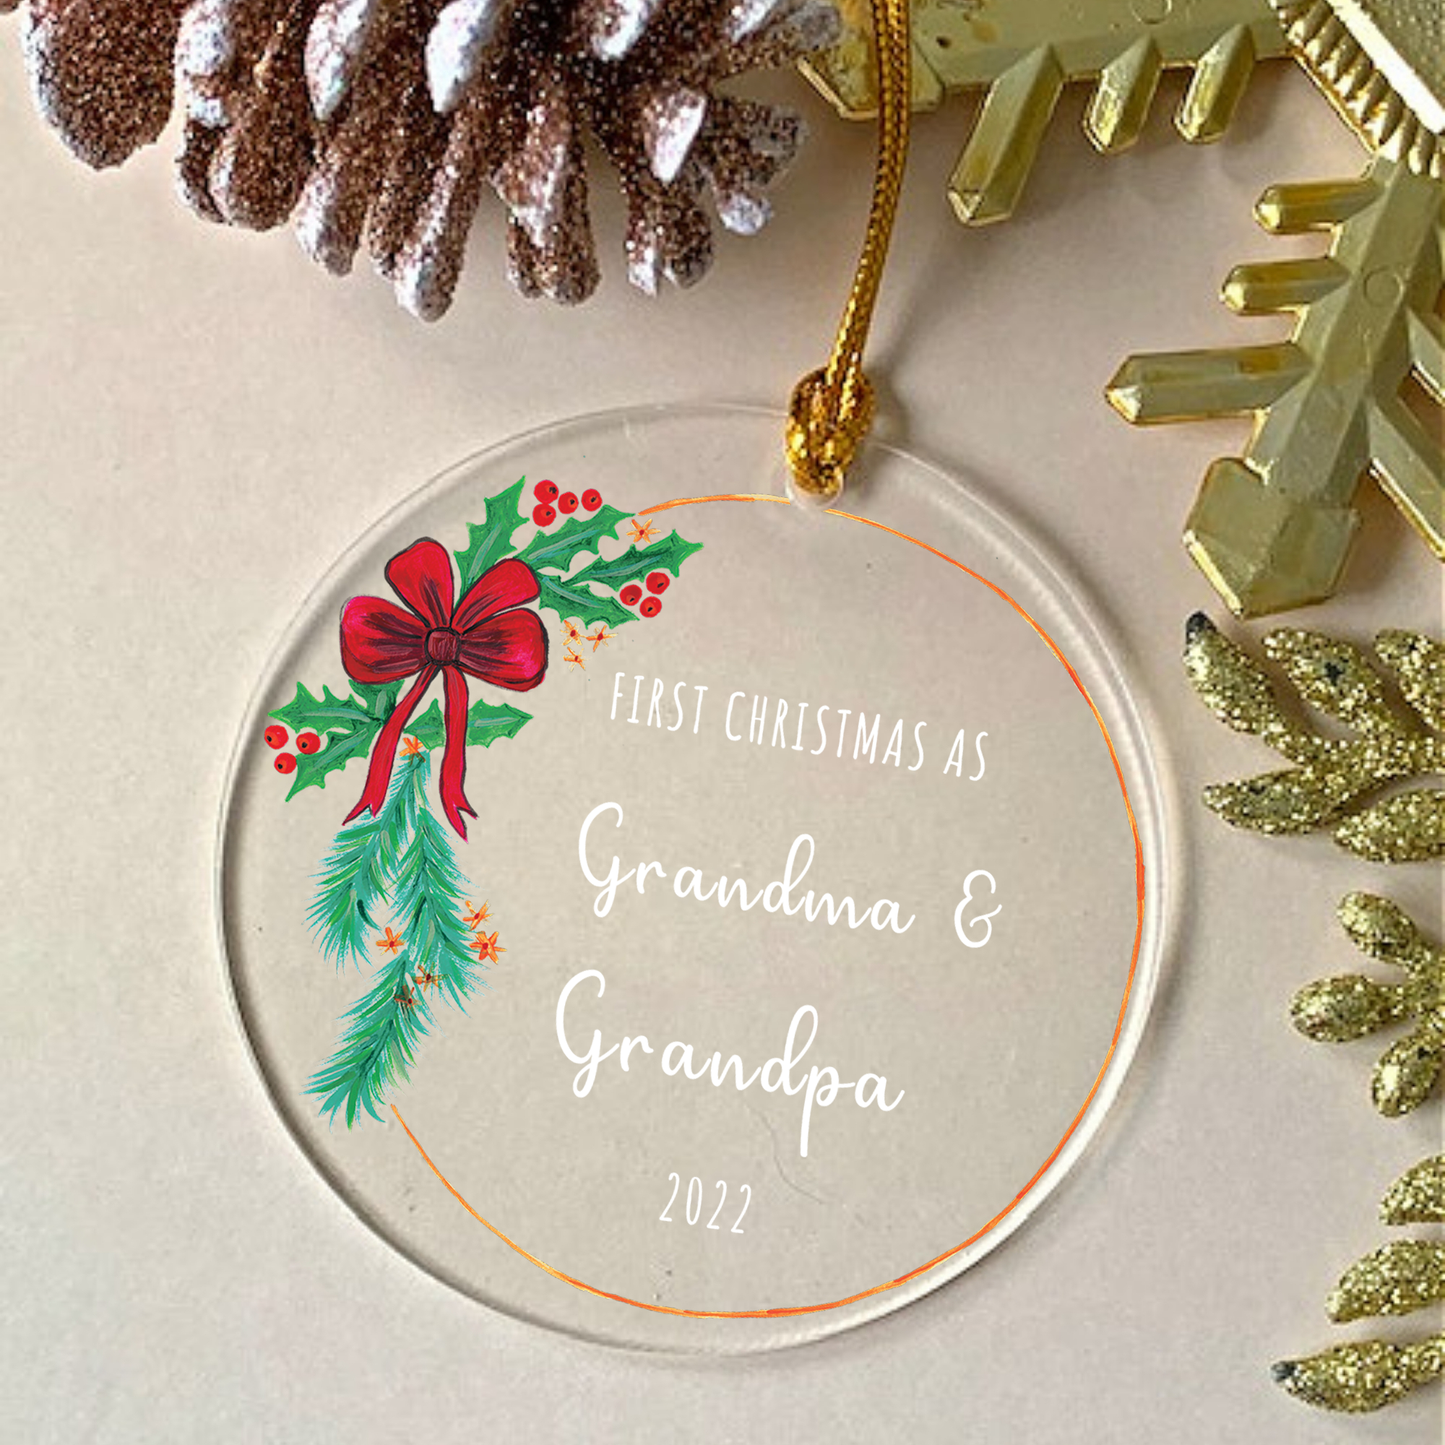 Personalized Ornament Our first Christmas as Grandparents Xmas Keepsake Custom 3.5" Acrylic Family Holiday Christmas Tree Decoration Gift